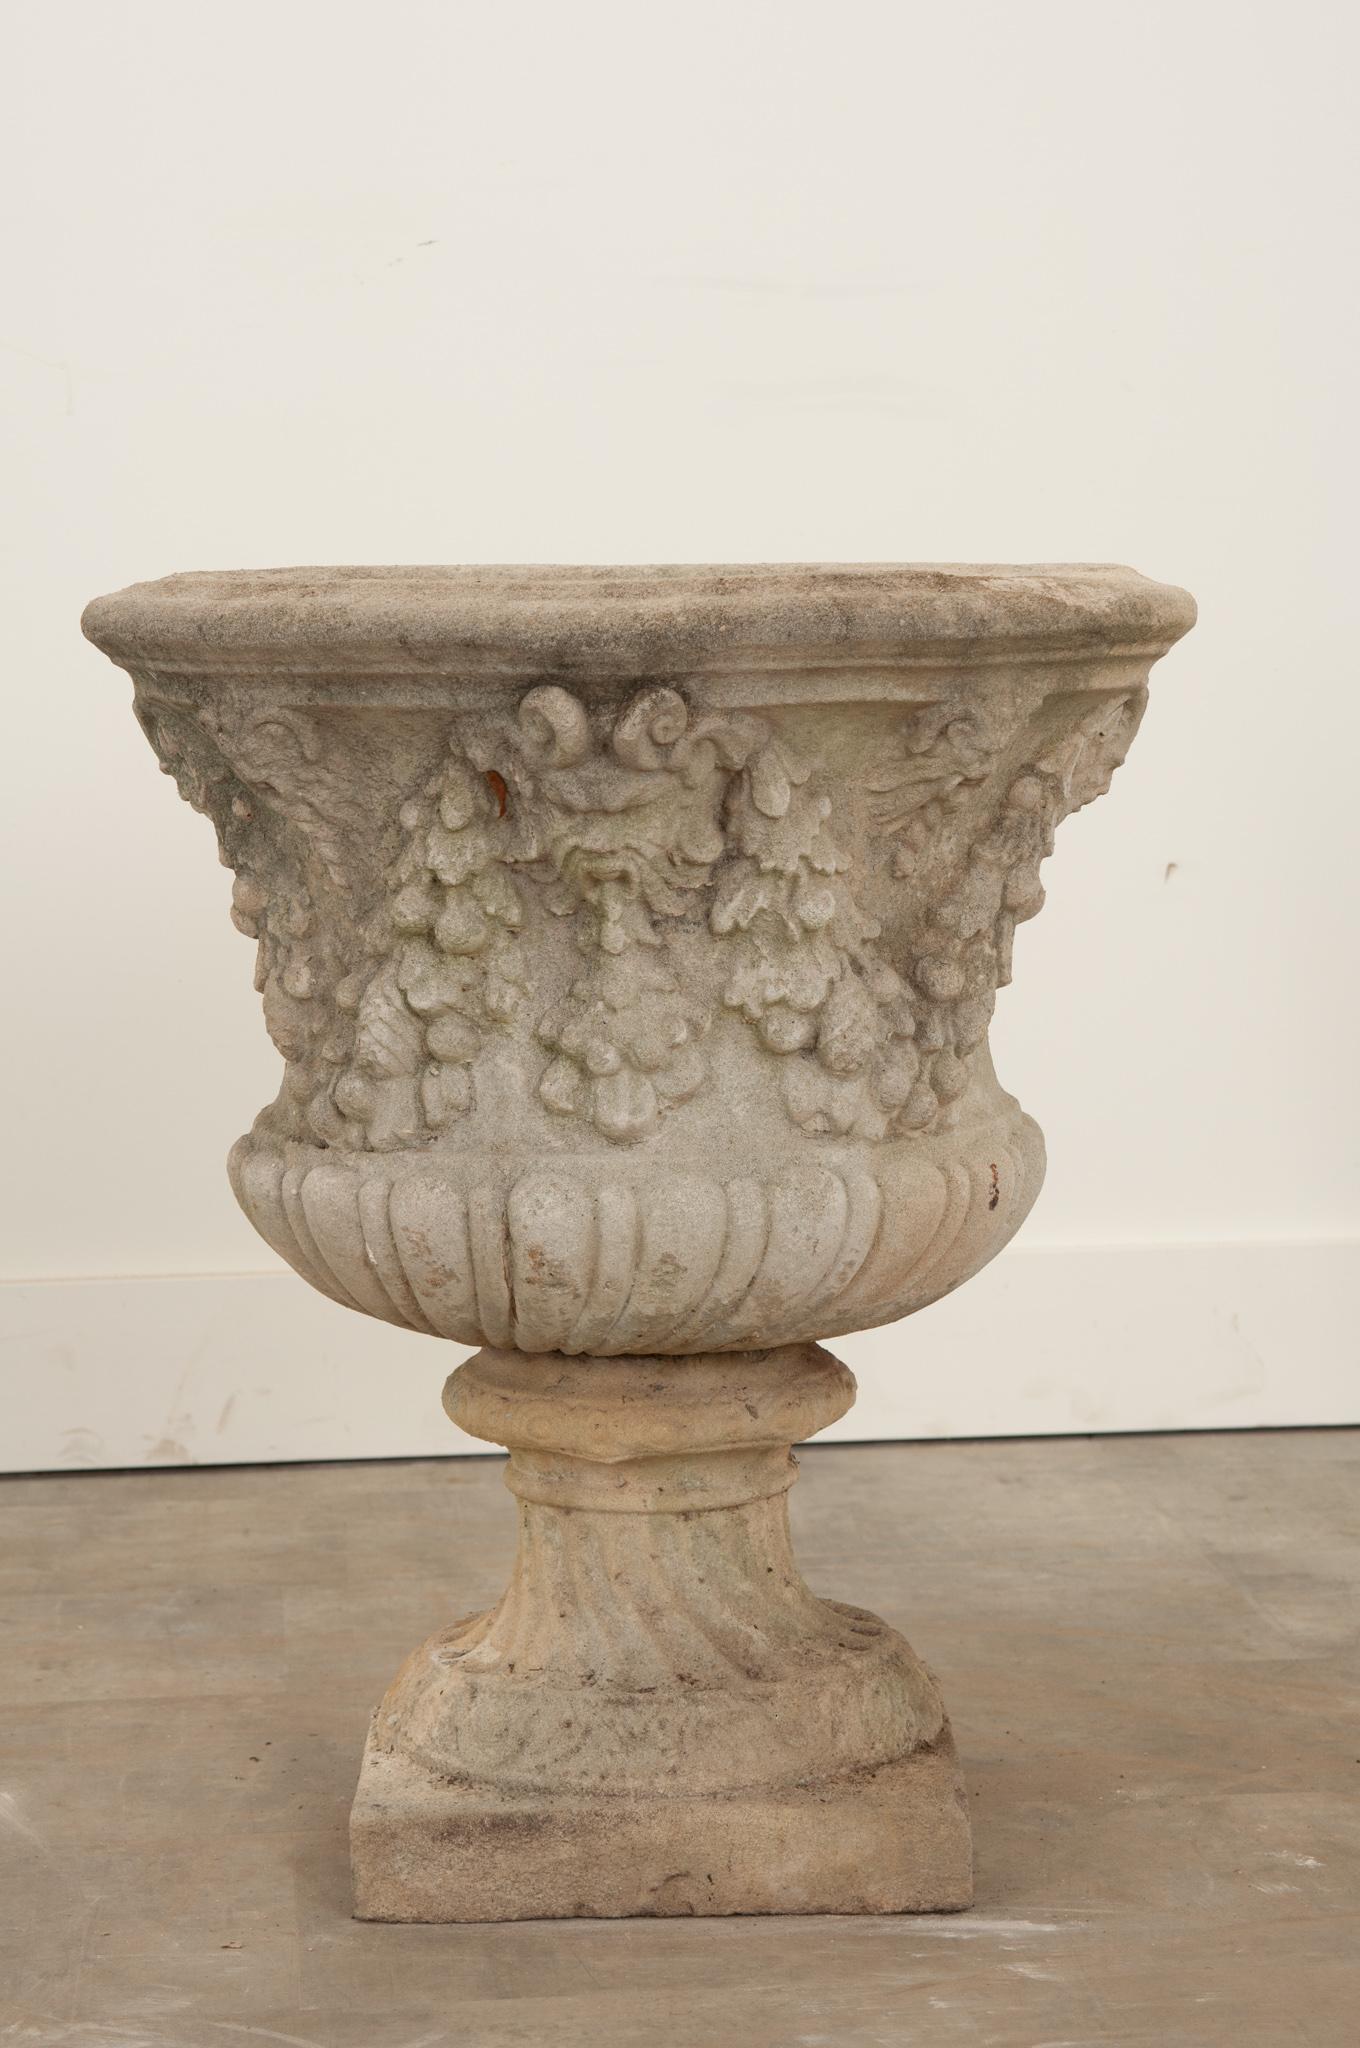 A delightful stone planter with an abundance of folate motifs and gargoyle faces. Water drainage hole is present. Basin is removable from the pedestal. Square base measures 12”x12”. Years of exposure to the elements have given it a great patina.